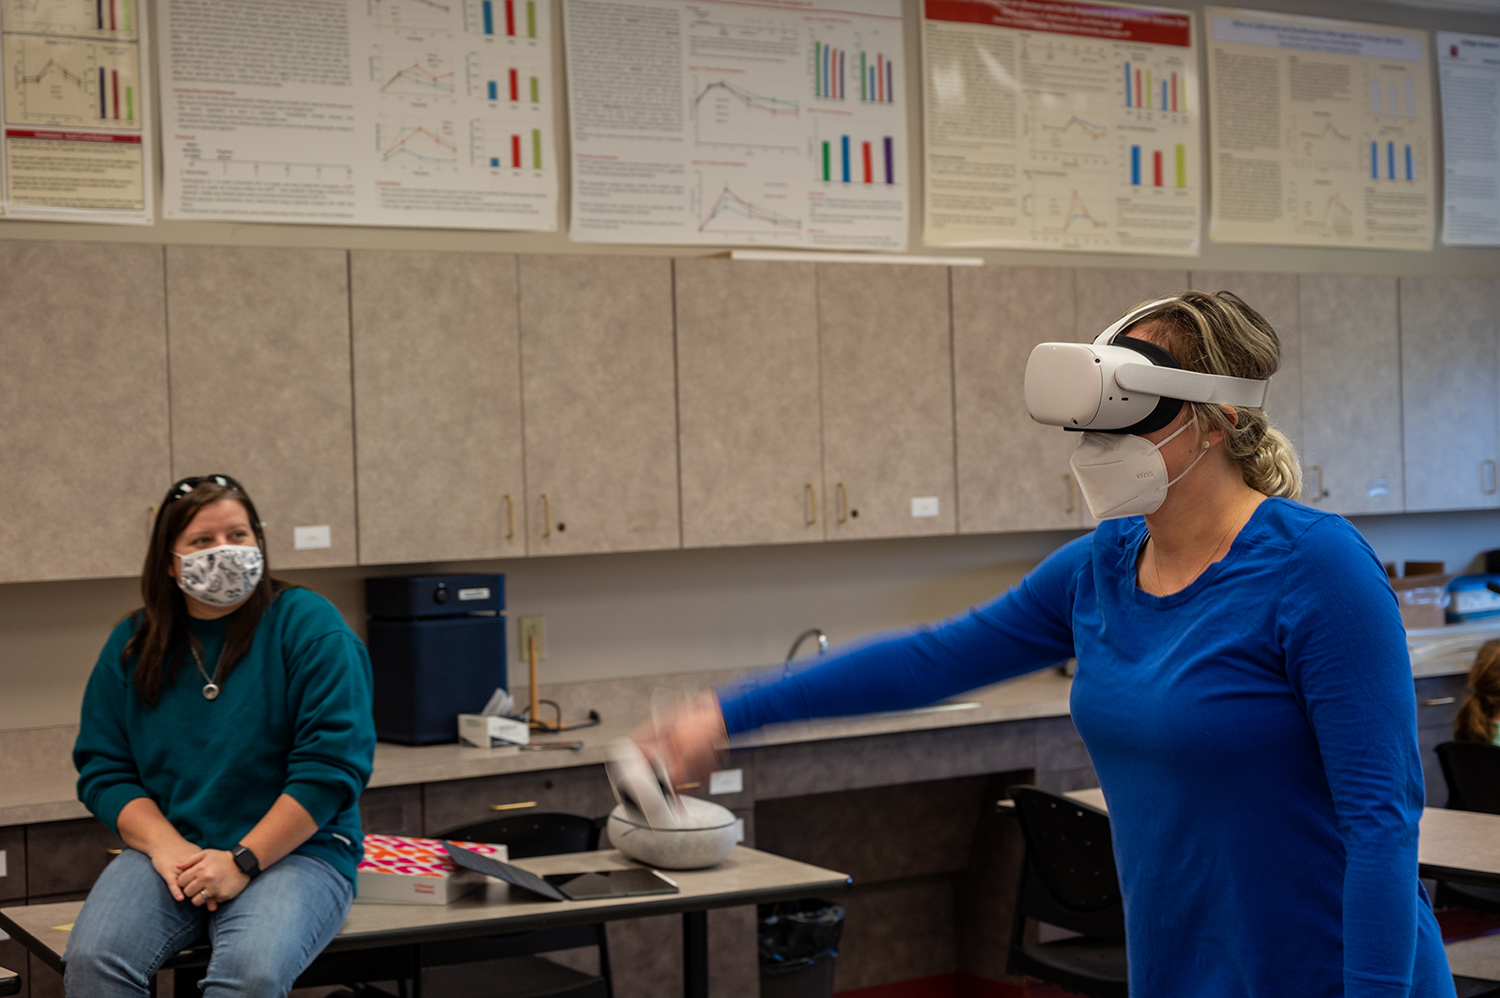 Virtual reality, real exercise: Transylvania study to measure health benefits of VR gaming